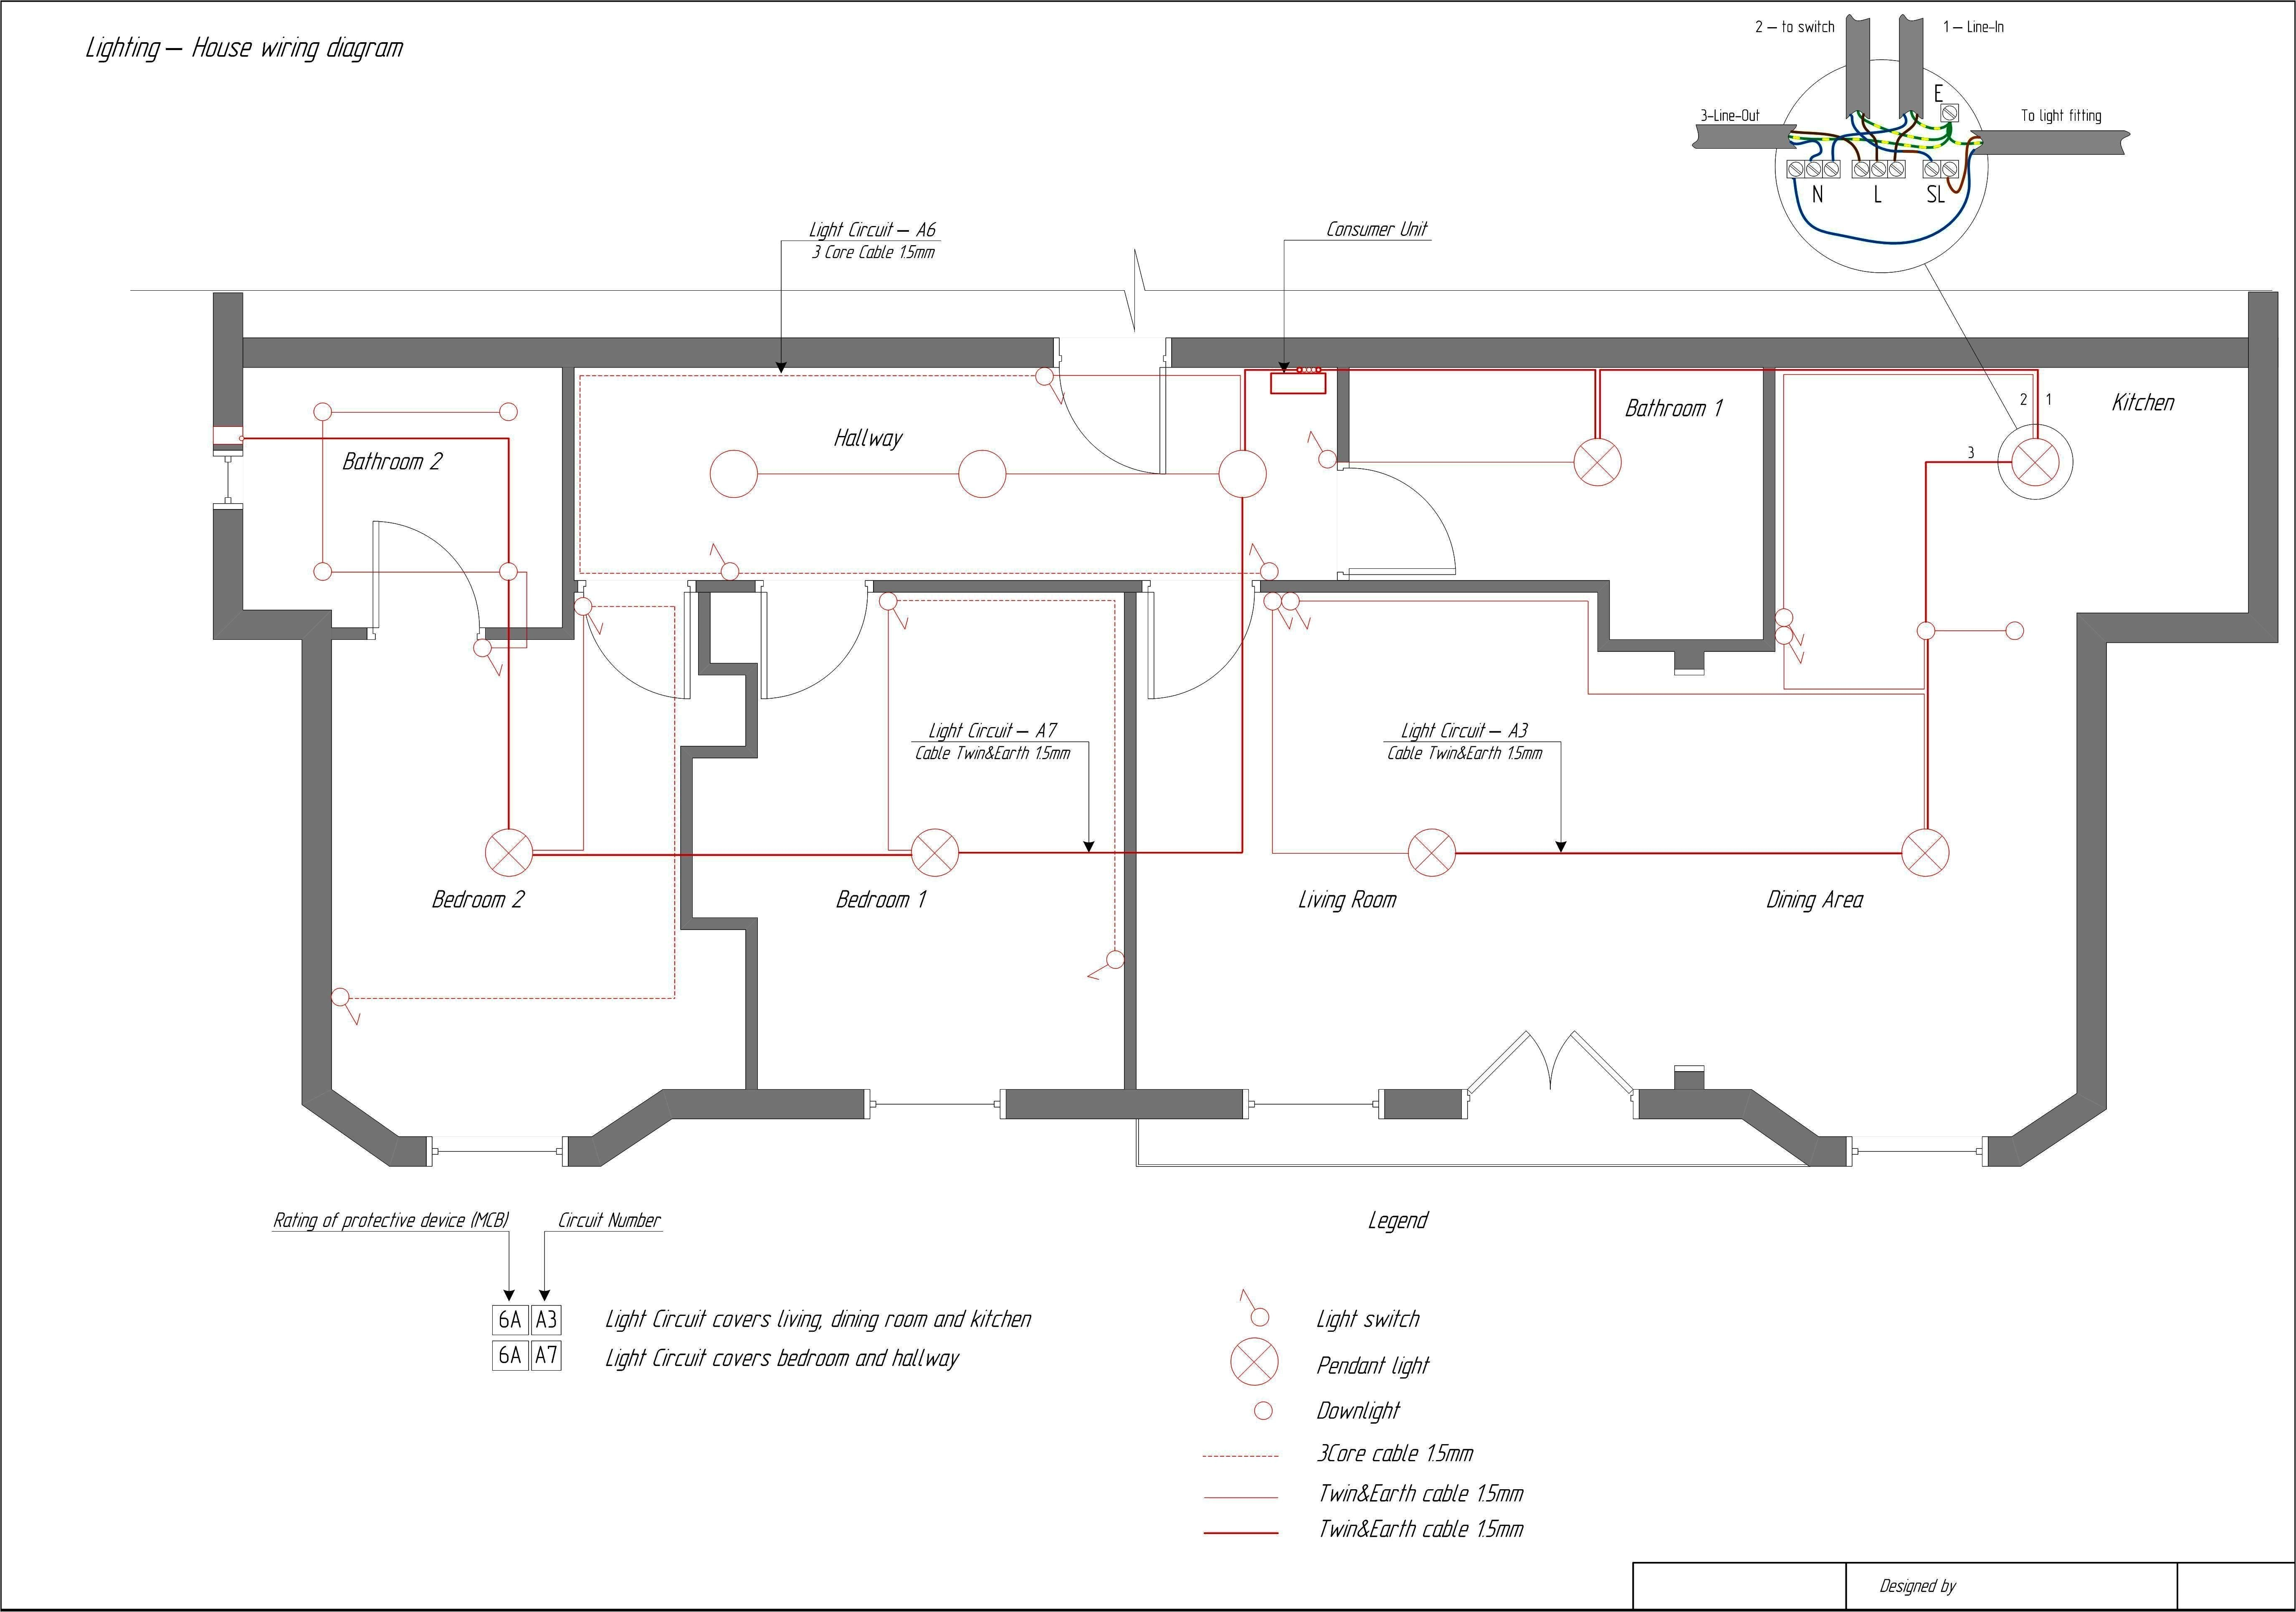 home wiring layout database wiring diagramhouse wiring diagram canada schema diagram database mobile home wiring layout